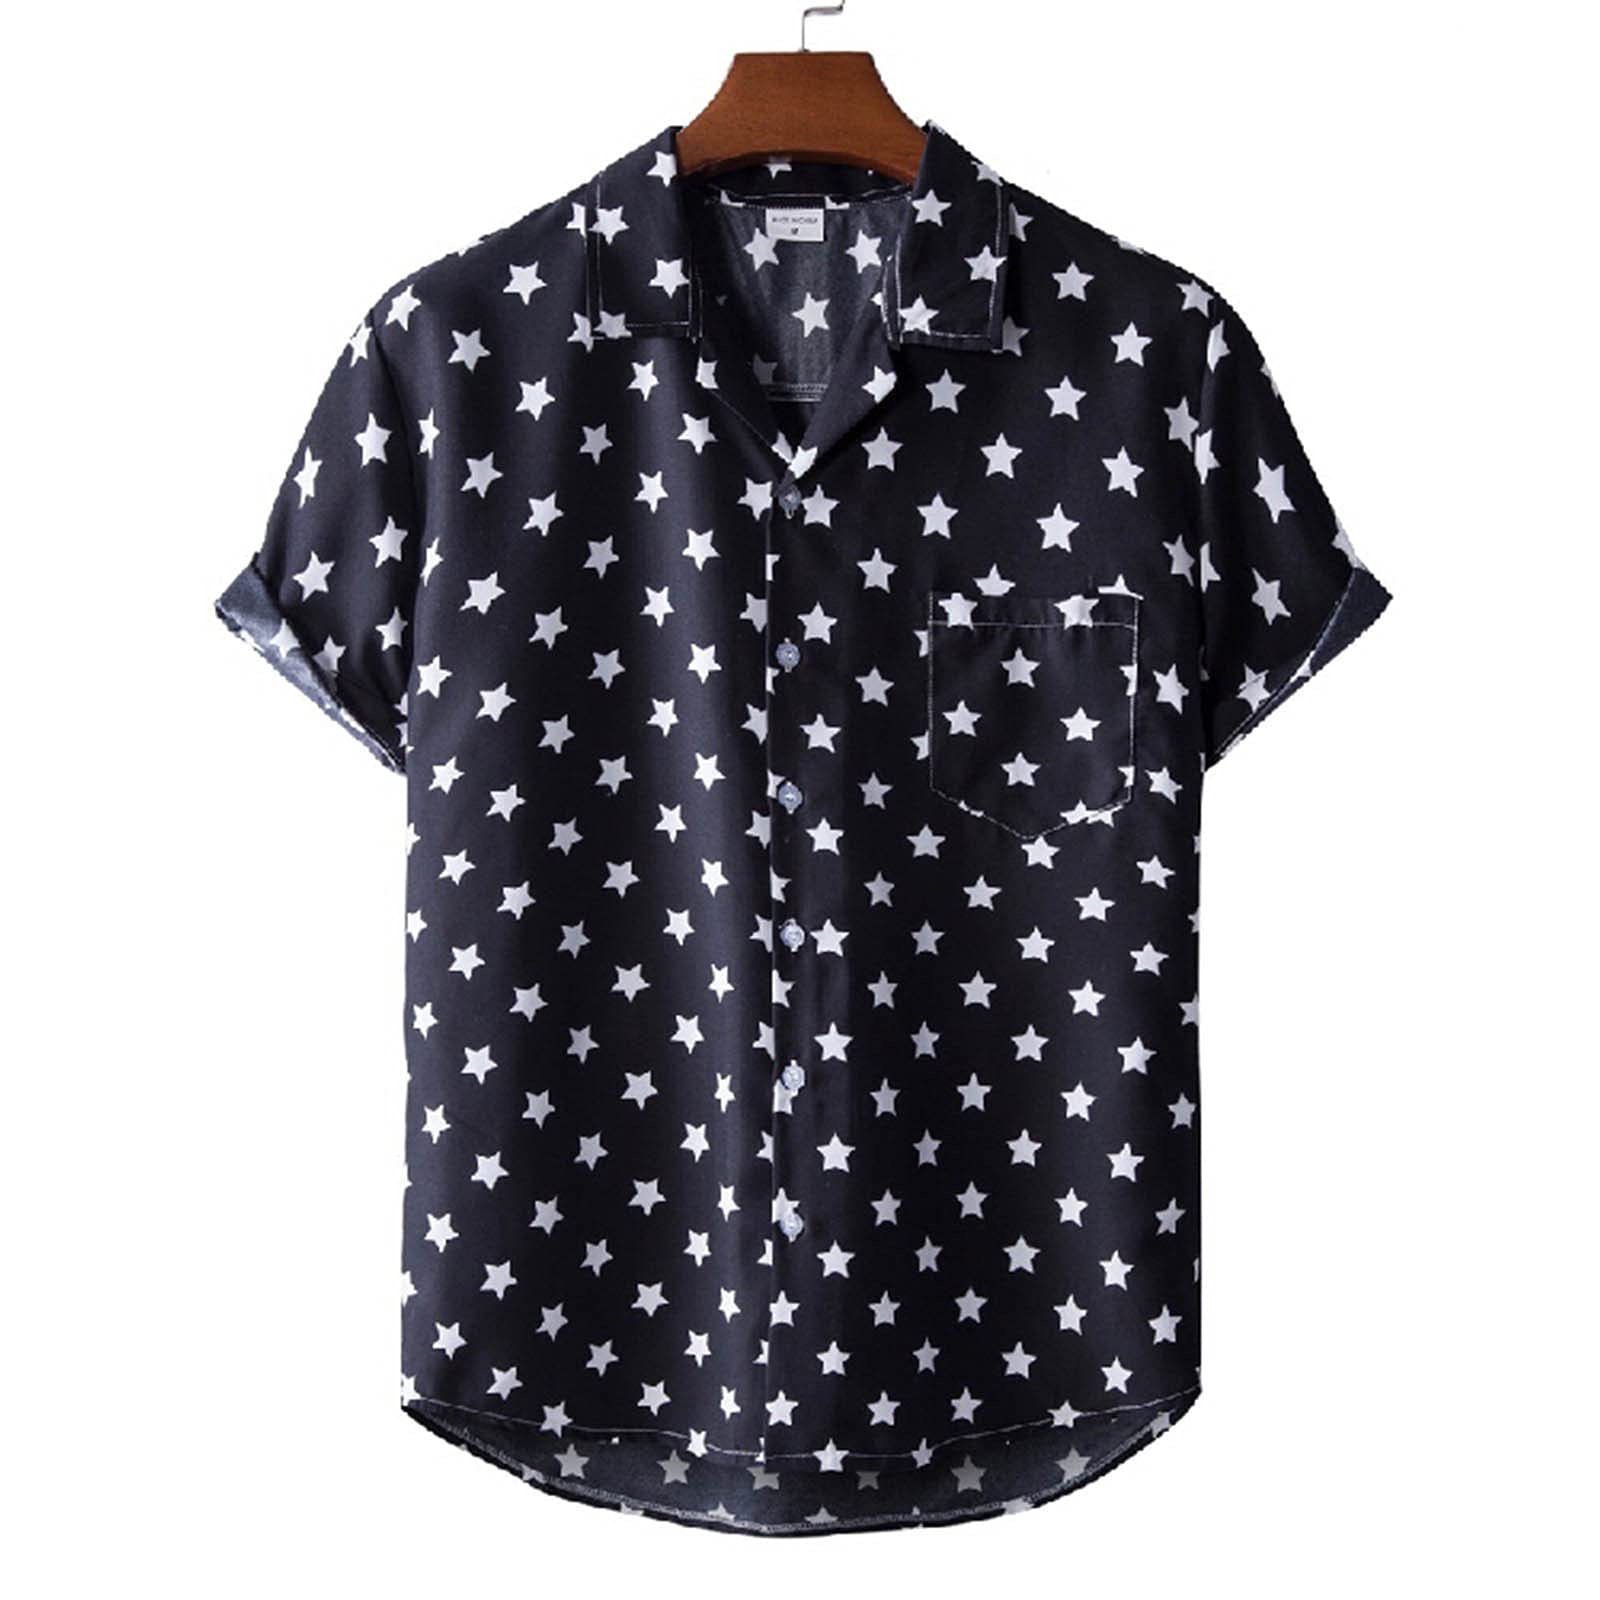 Men's Casual Summer Print Buttons Short Sleeves O-Neck Loose Shirts Blouse with Pocket(B, M)